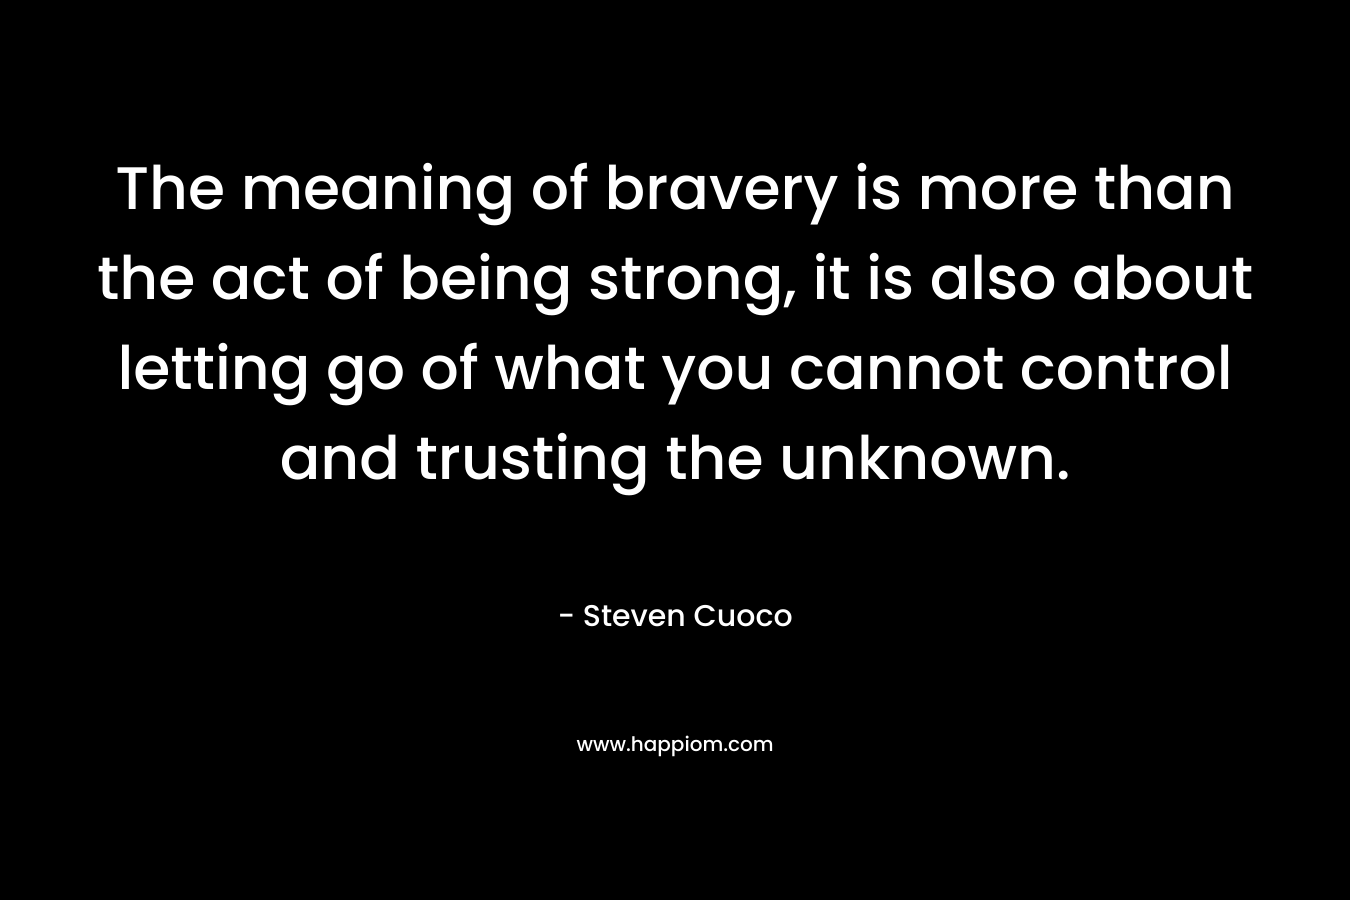 The meaning of bravery is more than the act of being strong, it is also about letting go of what you cannot control and trusting the unknown. – Steven Cuoco